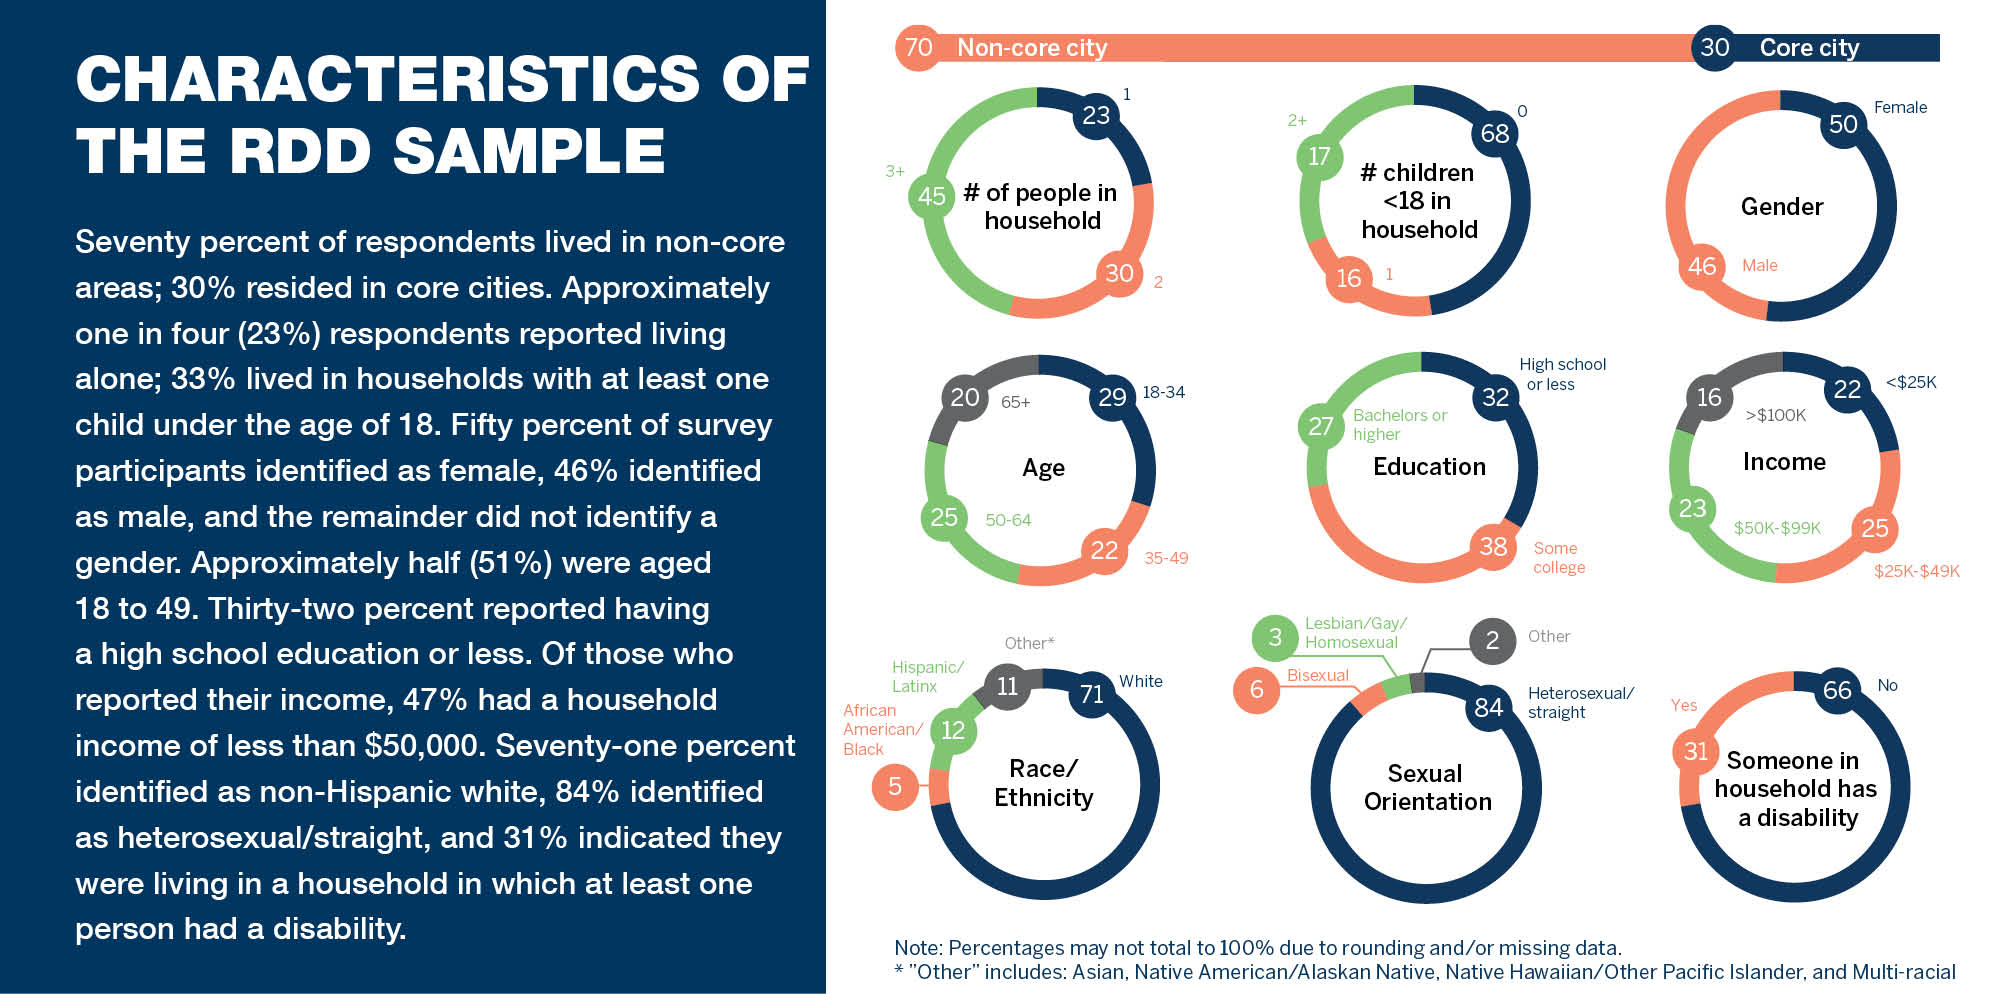 Characteristics Of The RDD Sample: Seventy percent of respondents lived in non-core areas; 30% resided in core cities. Approximately one in four (23%) respondents reported living alone; 33% lived in households with at least one child under the age of 18. Fifty percent of survey participants identified as female, 46% identified as male, and the remainder did not identify a gender. Approximately half (51%) were aged 18 to 49. Thirty-two percent reported having a high school education or less. Of those who reported their income, 47% had a household income of less than $50,000. Seventy-one percent identified as non-Hispanic white, 84% identified as heterosexual/straight, and 31% indicated they were living in a household in which at least on person had a disability.